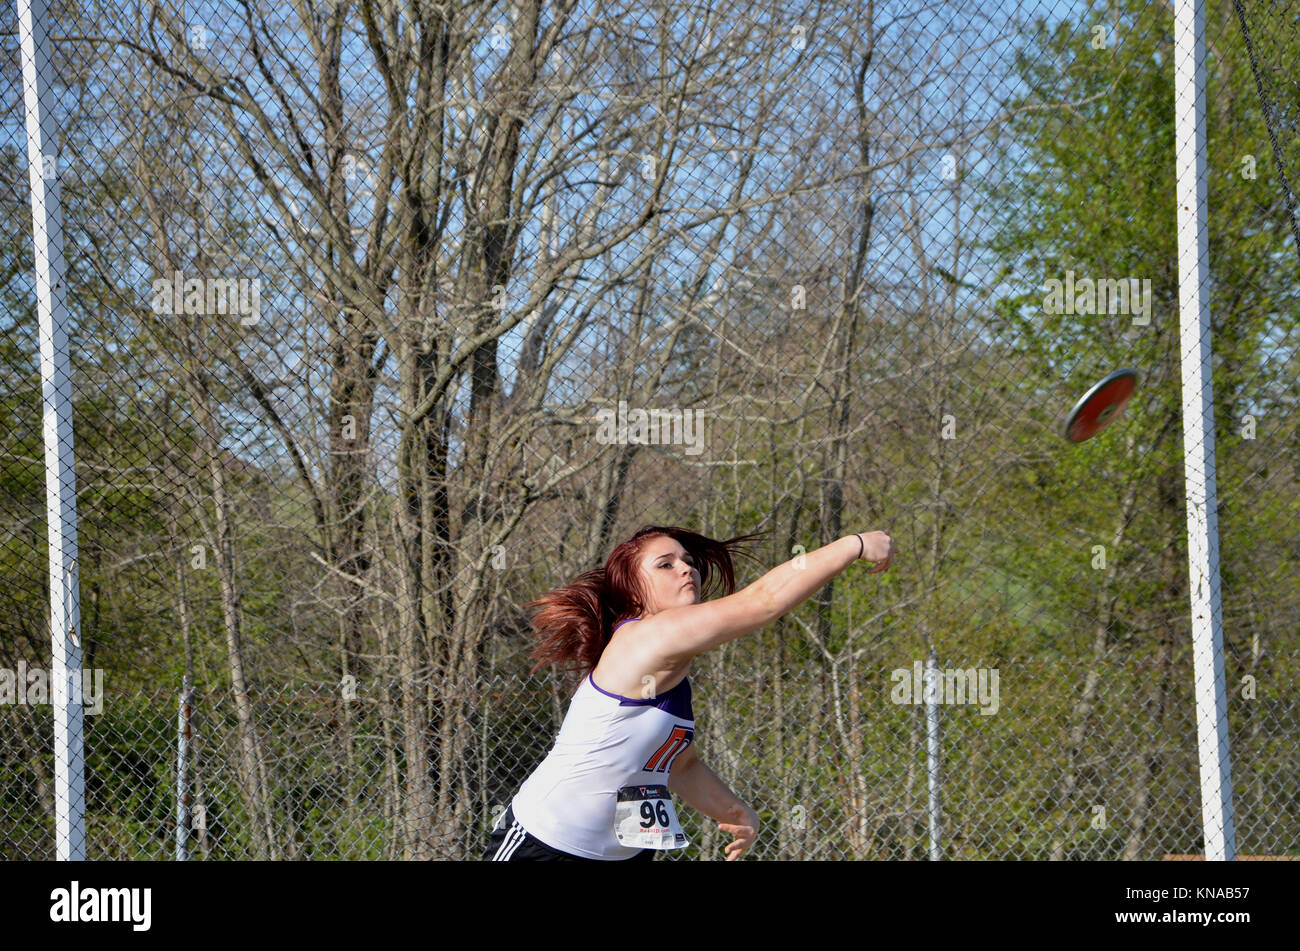 Girl throwing a disk in a high school discus throwing event at a  track and field event Stock Photo